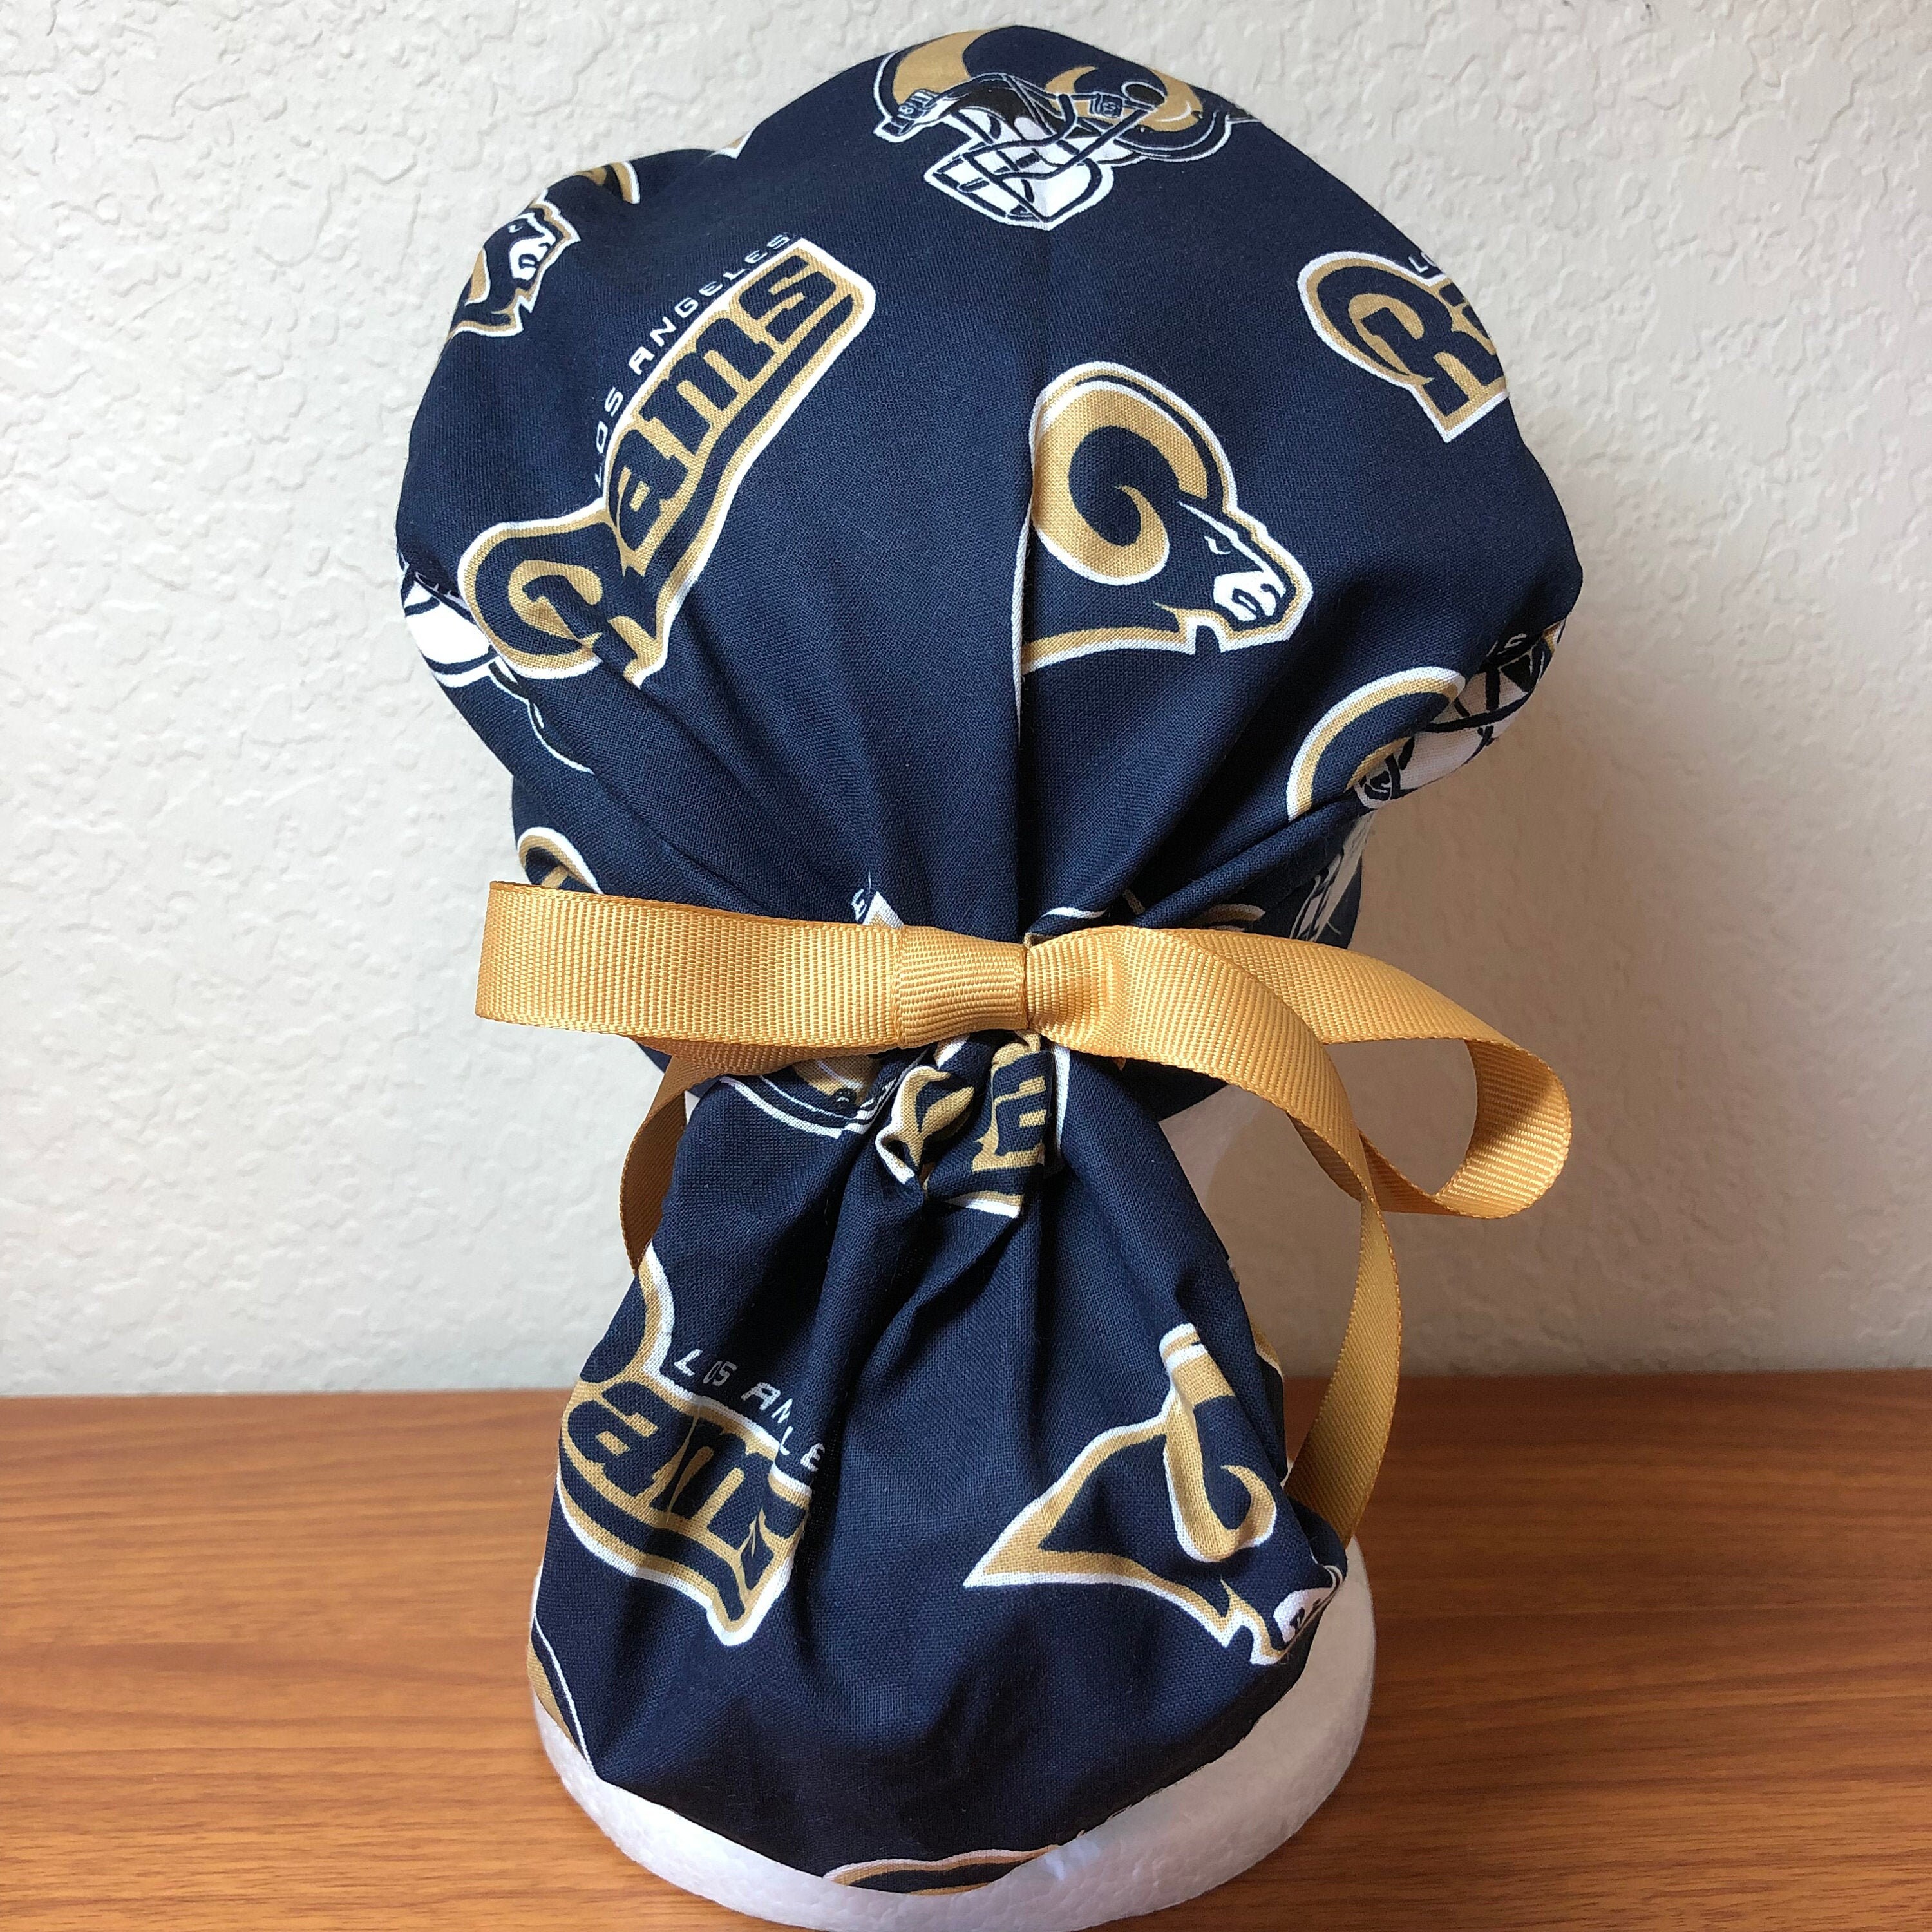 Los Angeles Rams Ponytail Scrub Cap For Women, La Cap, Rams Surgical Hat, Team/Sports Or